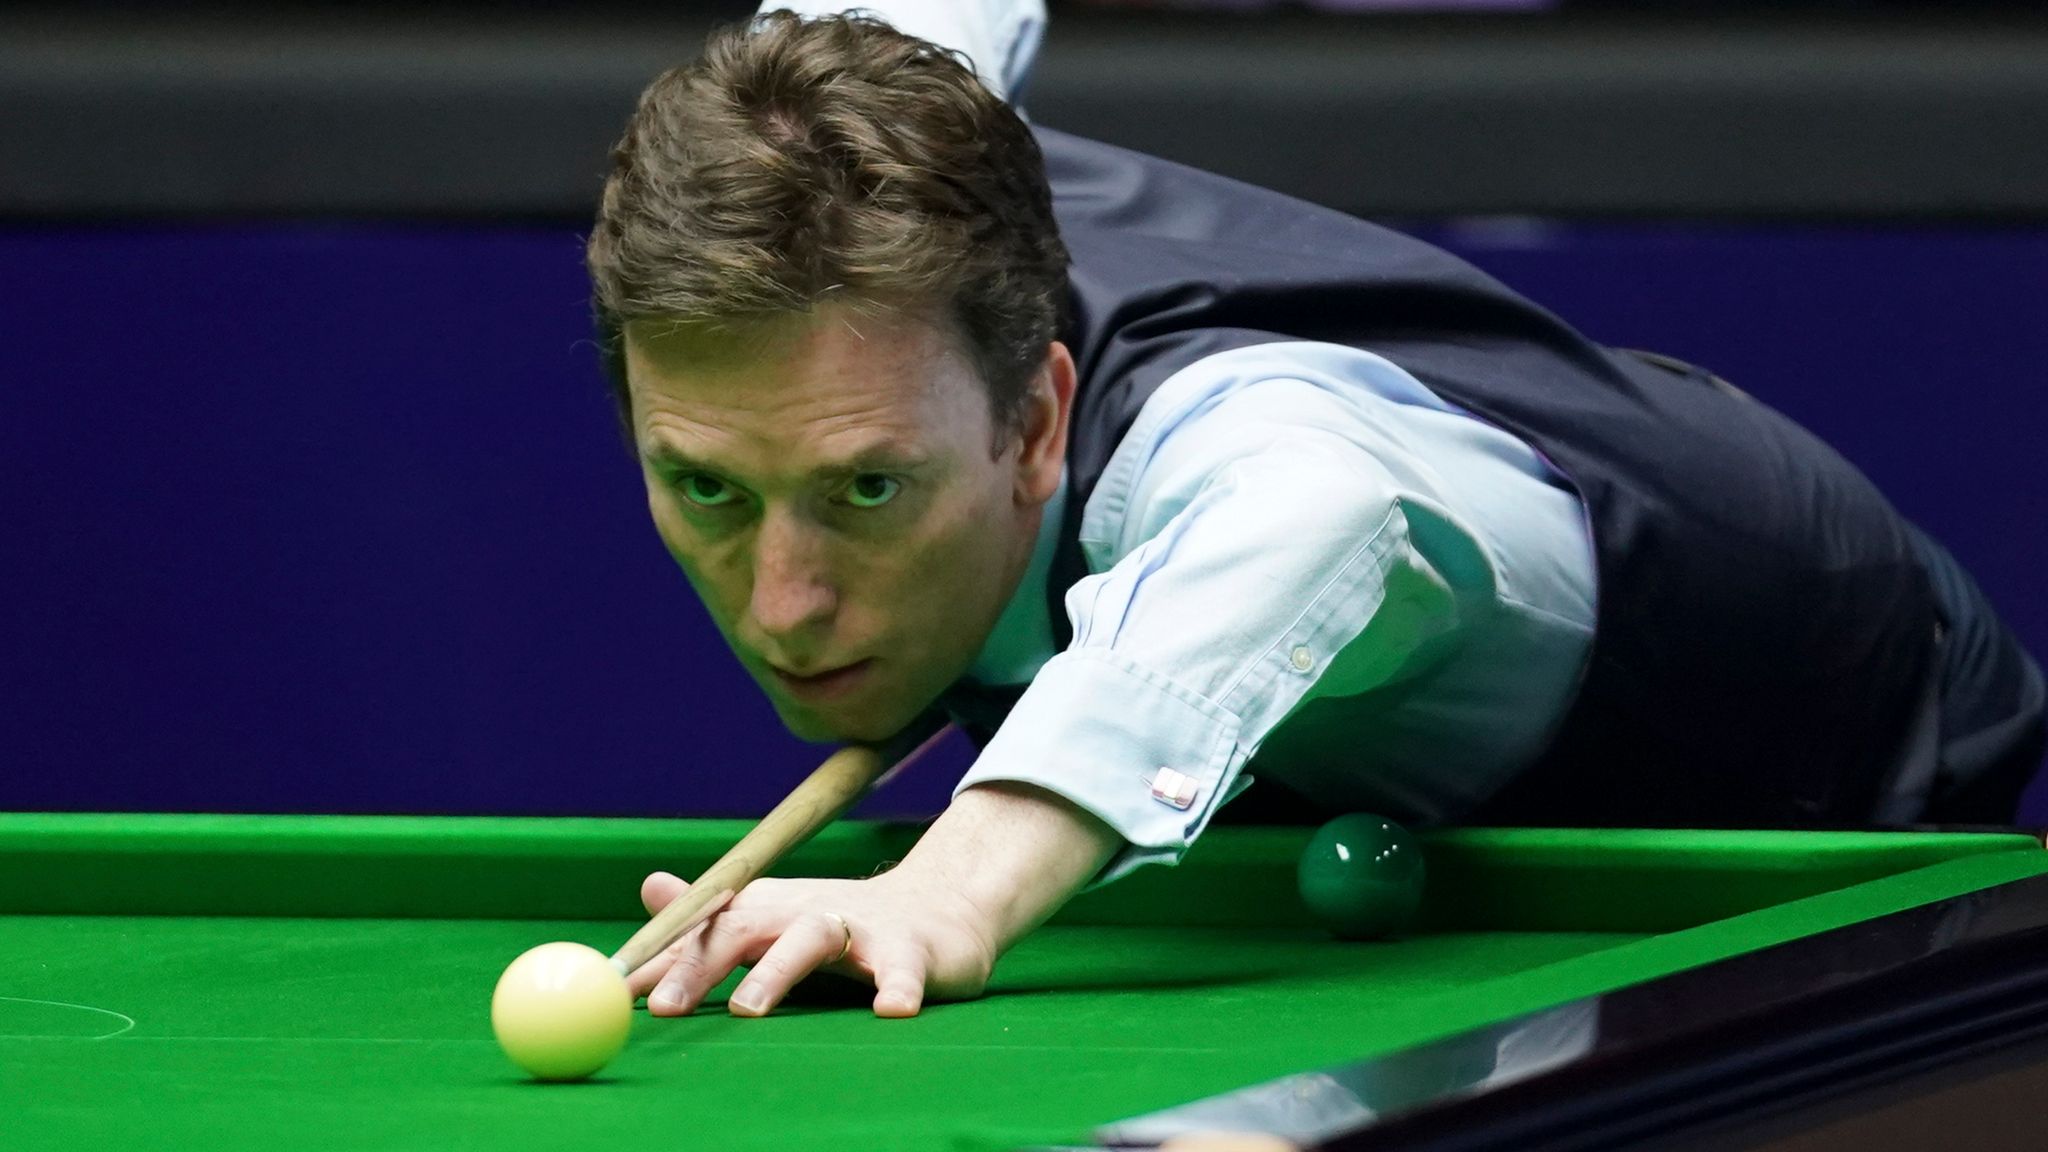 Ken Doherty and Jimmy White fall short in qualifying for World Snooker  Championship | Snooker News | Sky Sports